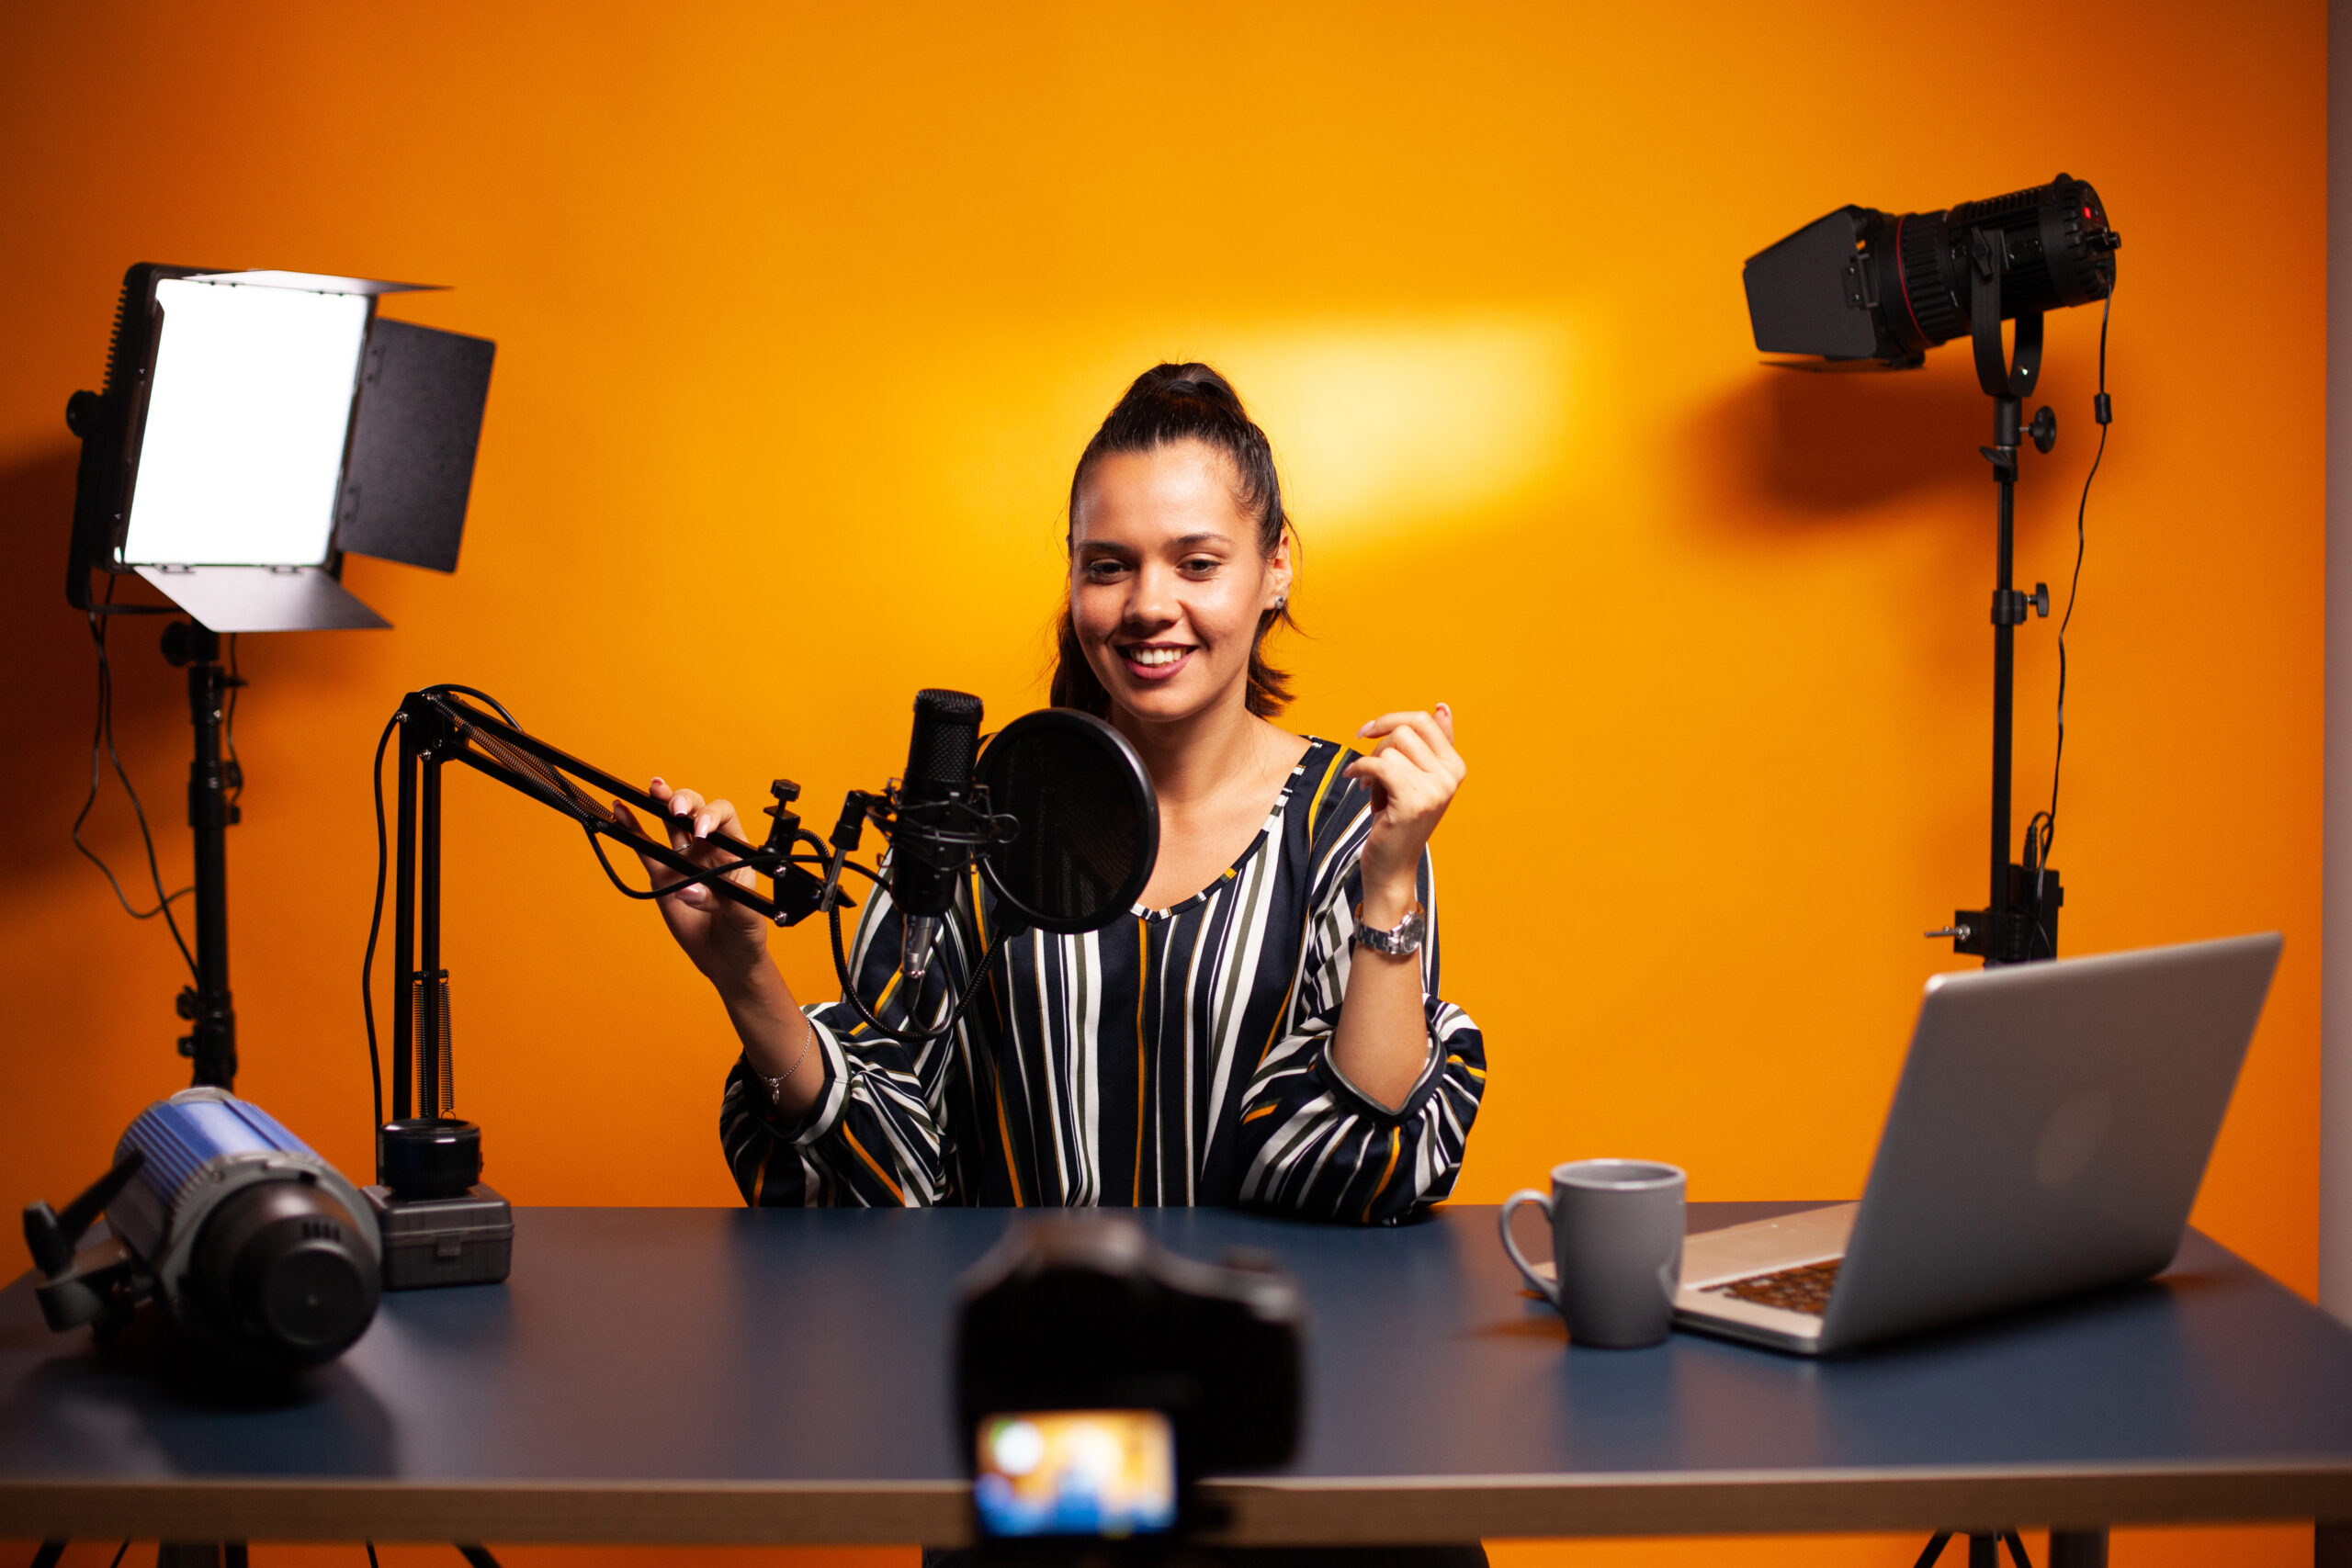 Famous vlogger recording video using professional recording gear. Content creator new media star on social media recording for internet web online subscribers audience new podcast episode.